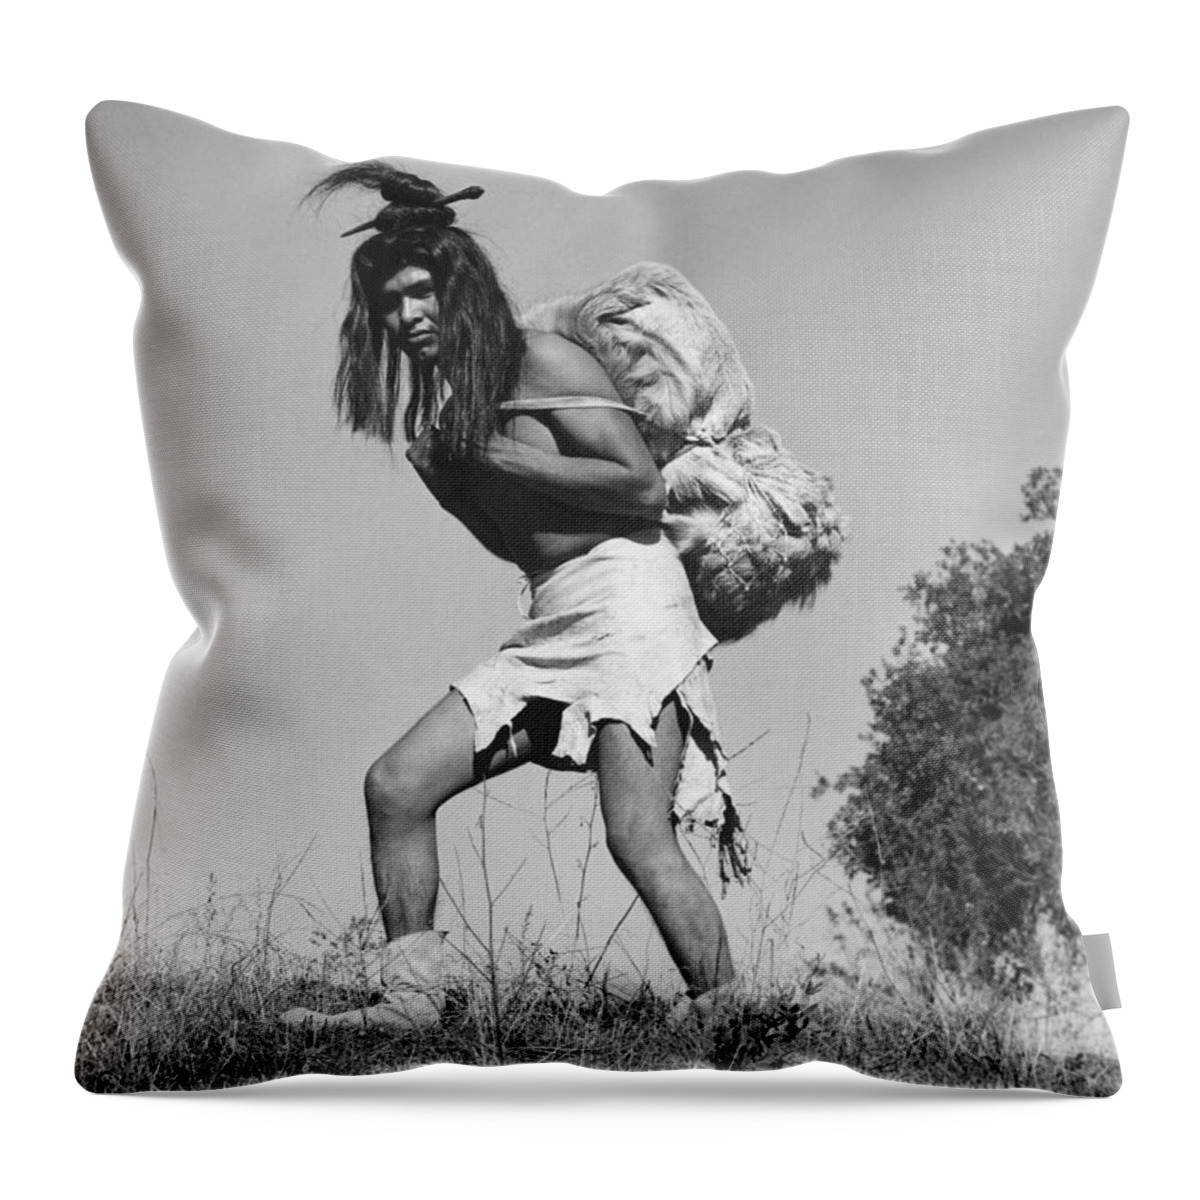 1 Person Only Throw Pillow featuring the photograph Native American Traders #1 by Underwood Archives Onia